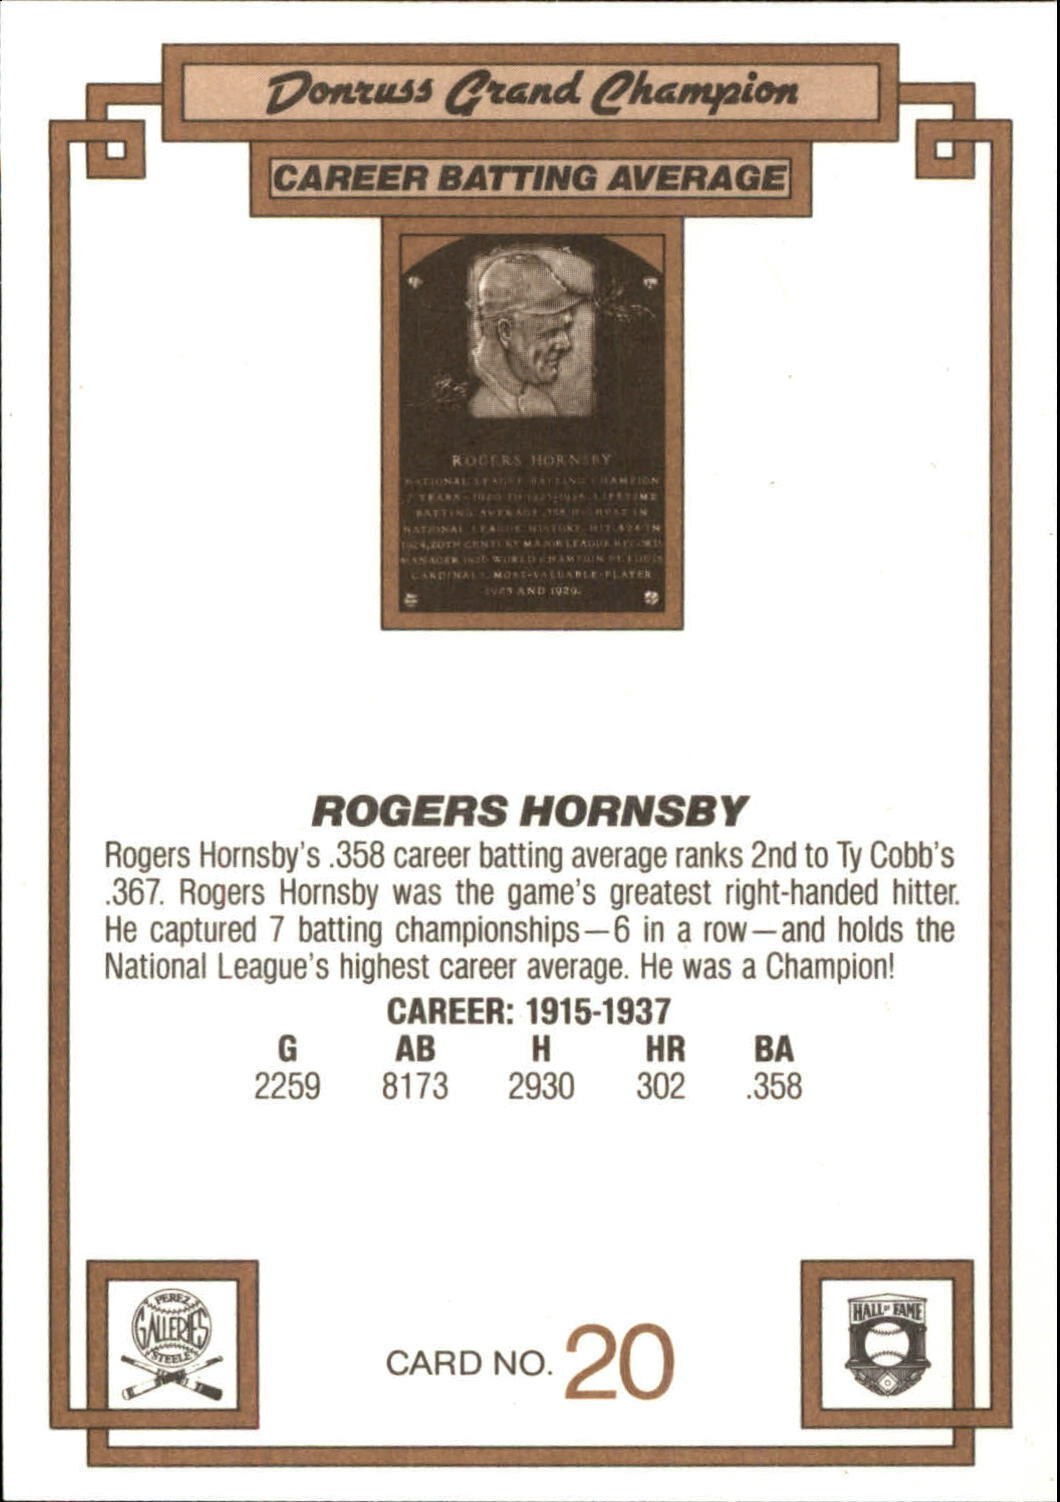 1984 Donruss Champions HALL OF FAME Card - #20 ROGERS HORNSBY - ST. LOUIS CARDINALS